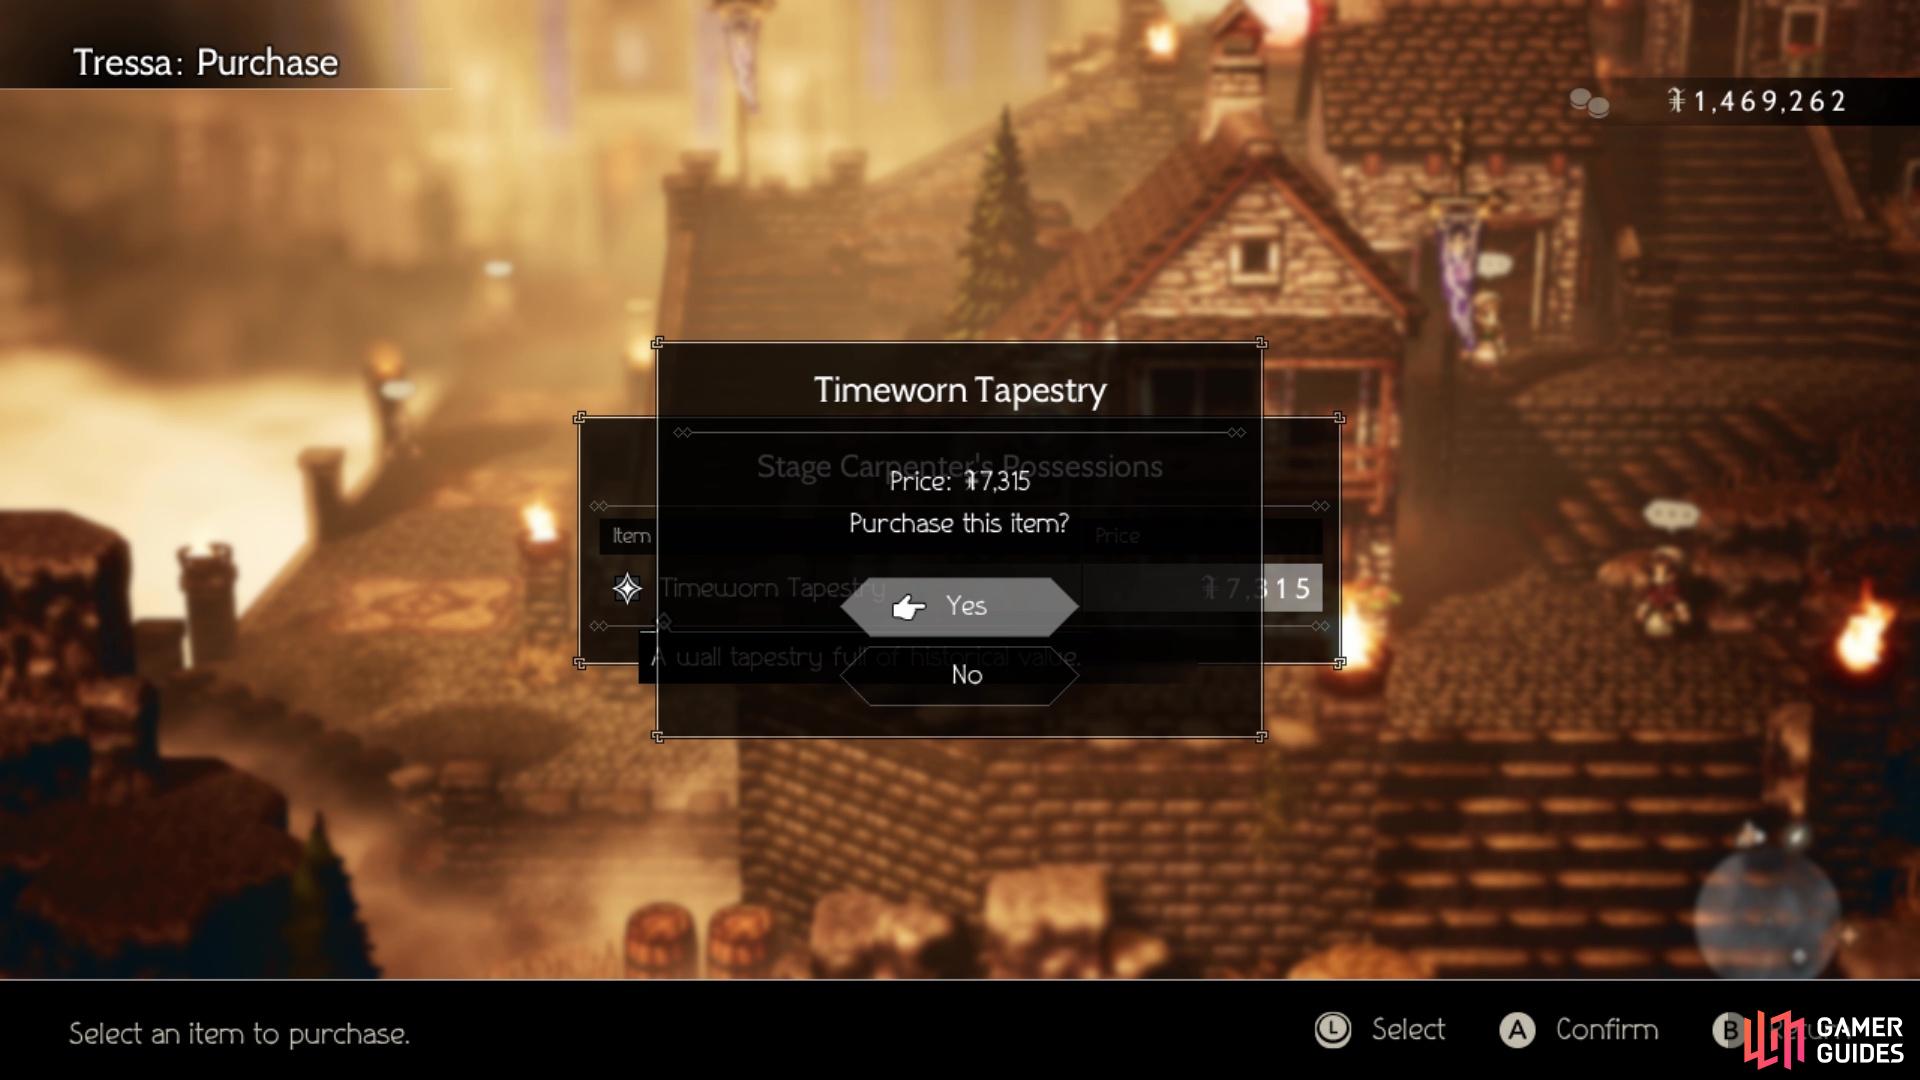 It’s much easier to just Purchase the Timeworn Tapestry with Tressa